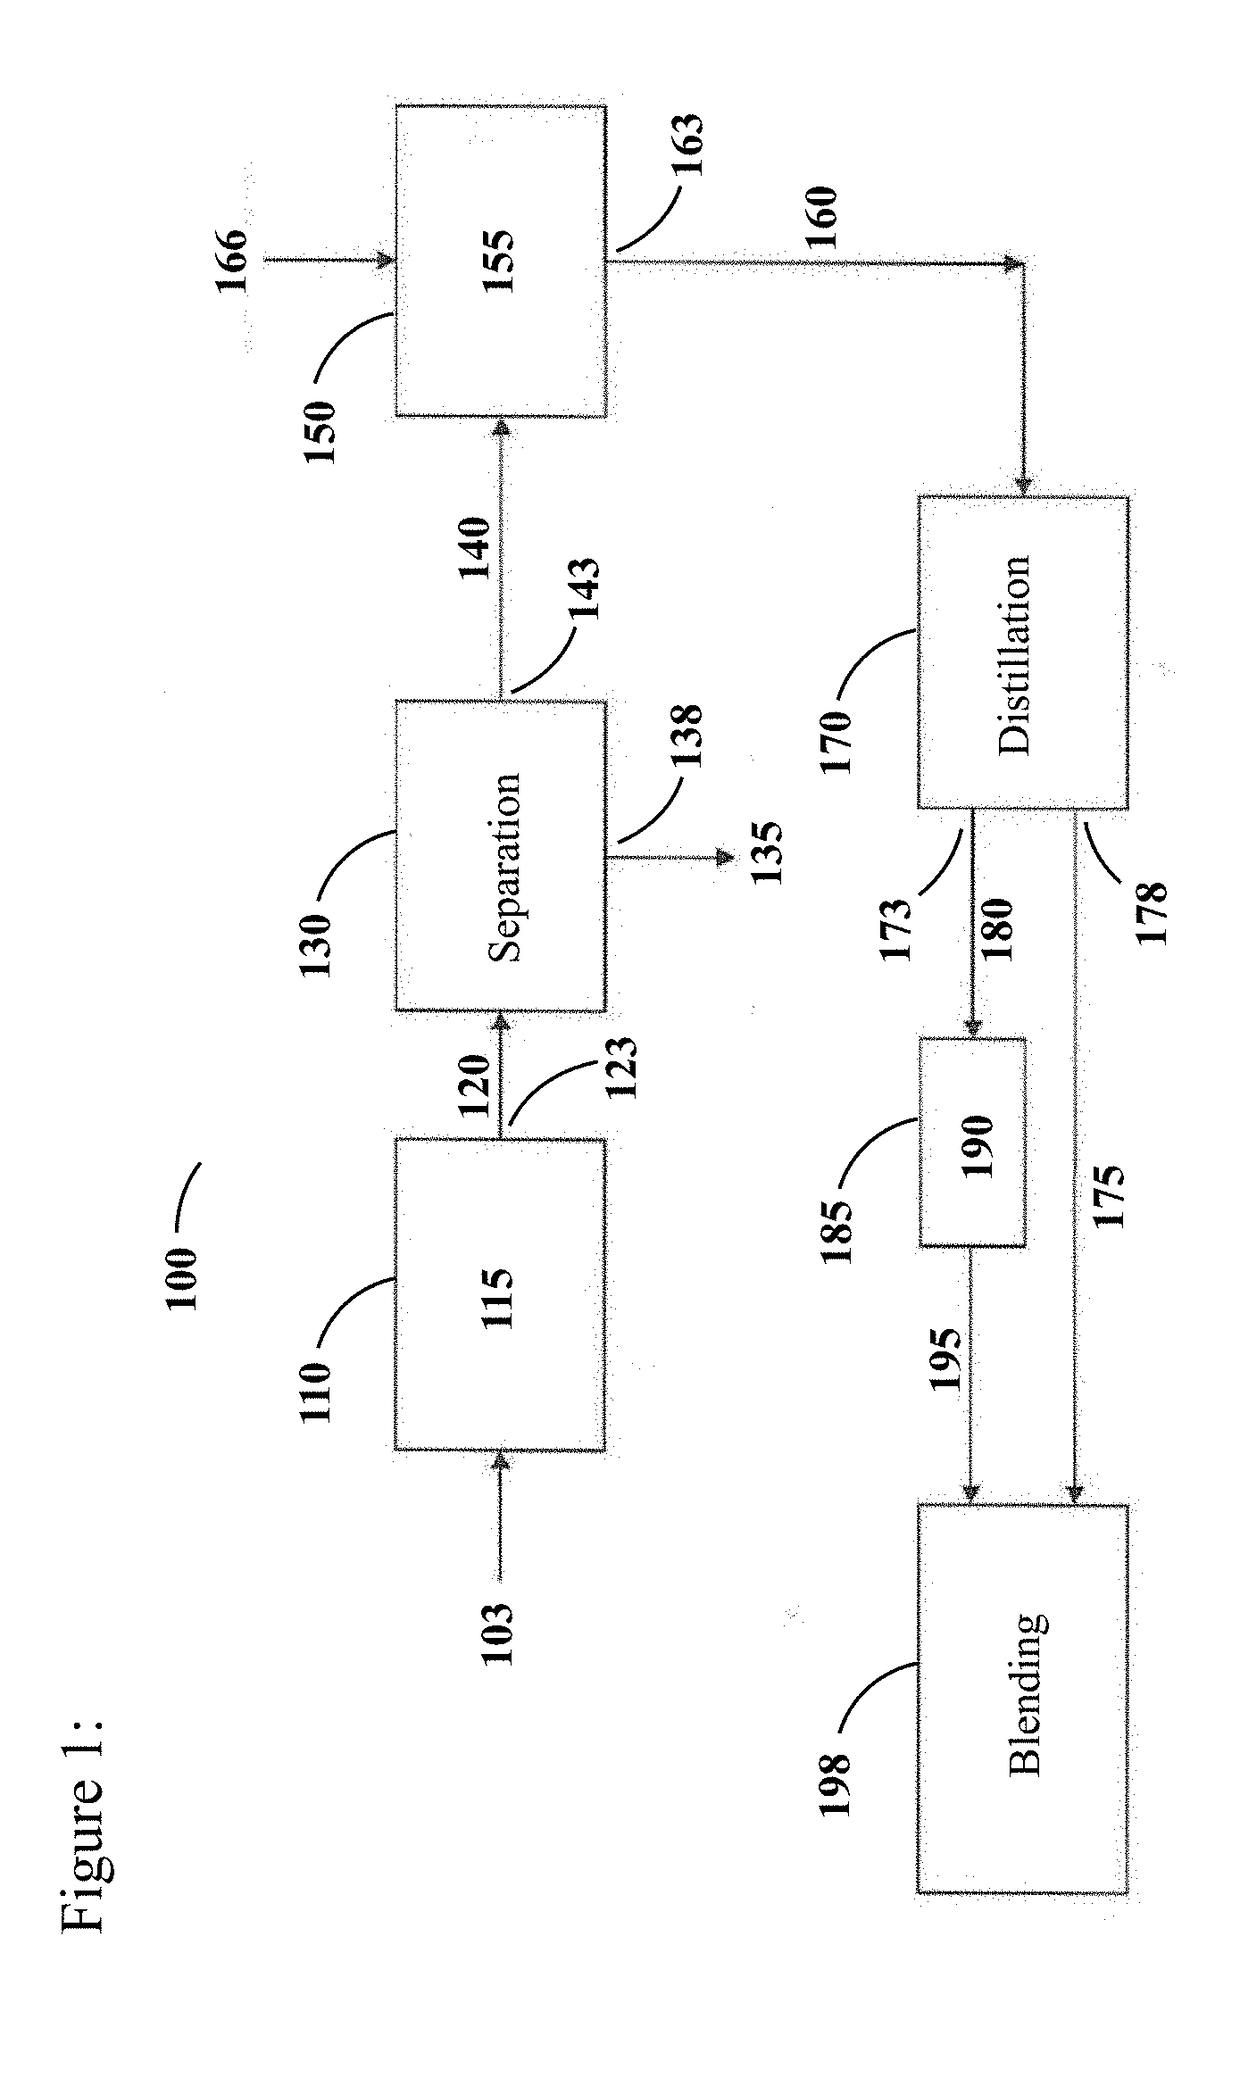 Processes for selective naphtha reforming